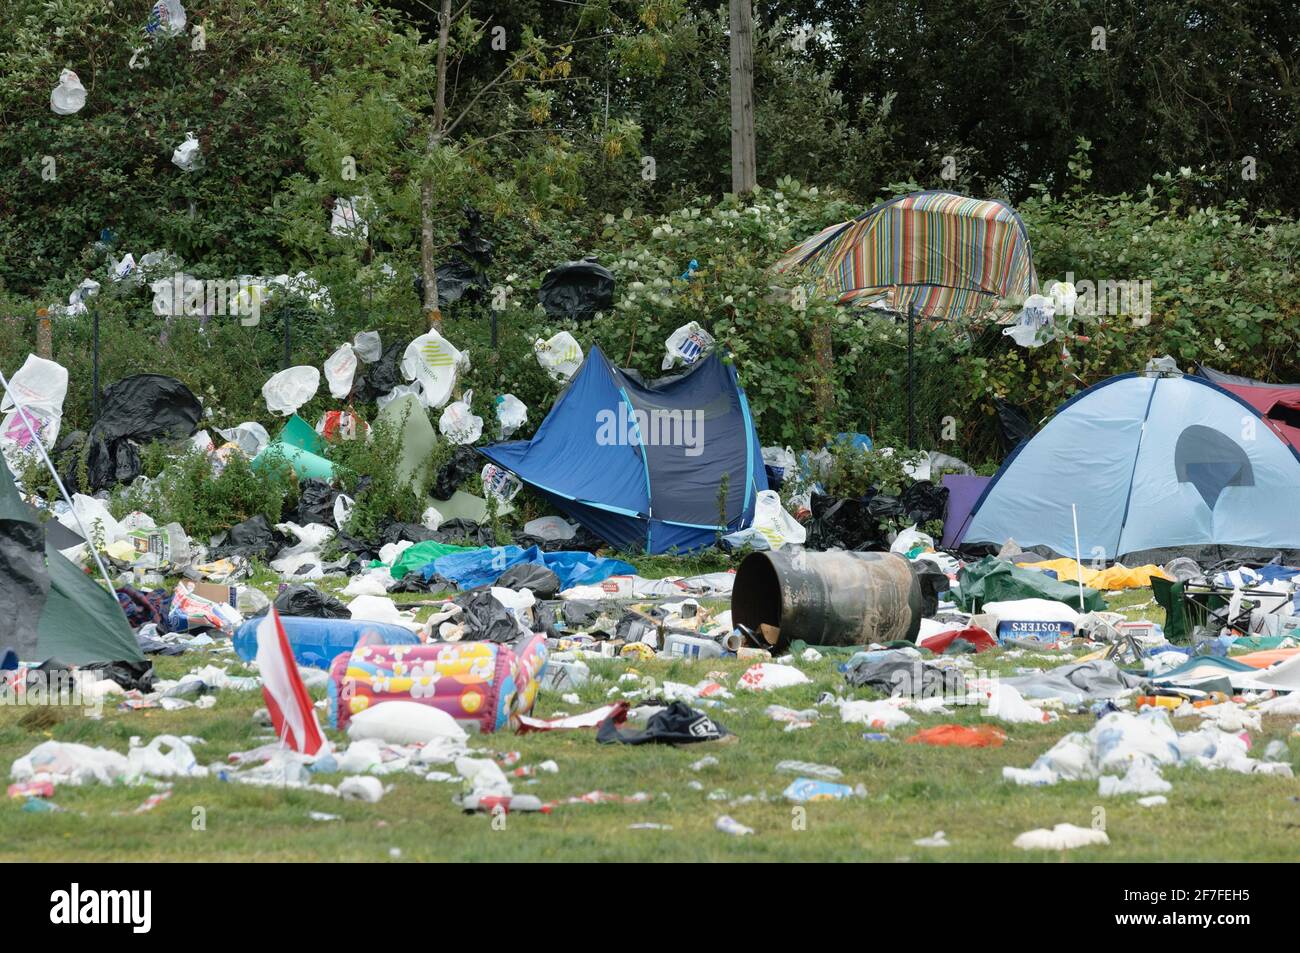 Rubbish And Abandoned Tents Left Behind After The Annual Reading Music Festival Little John S